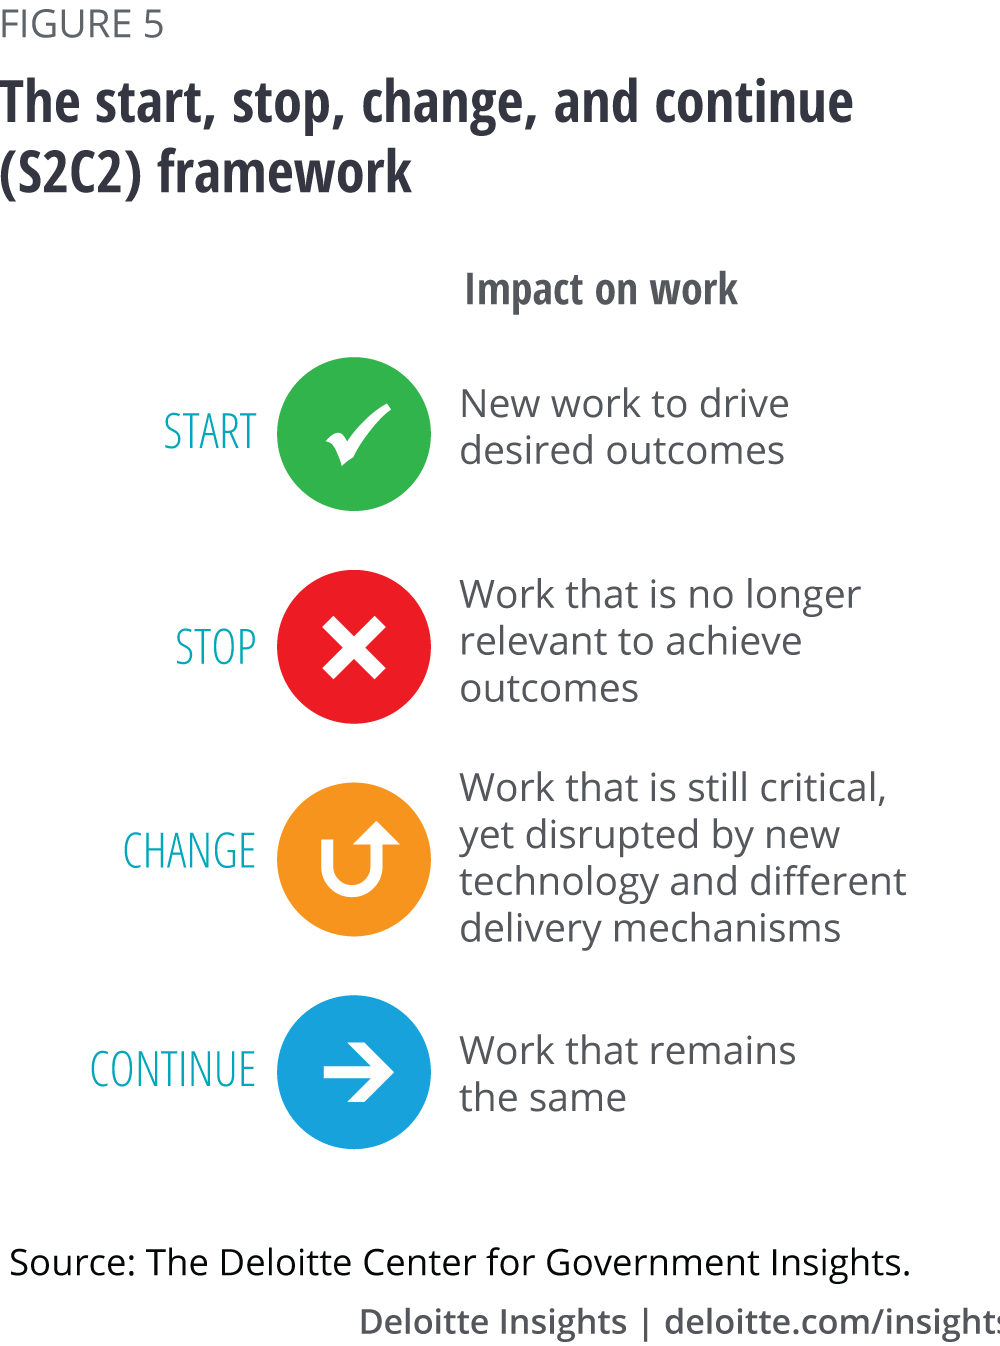 The start, stop, change, and continue (S2C2) framework